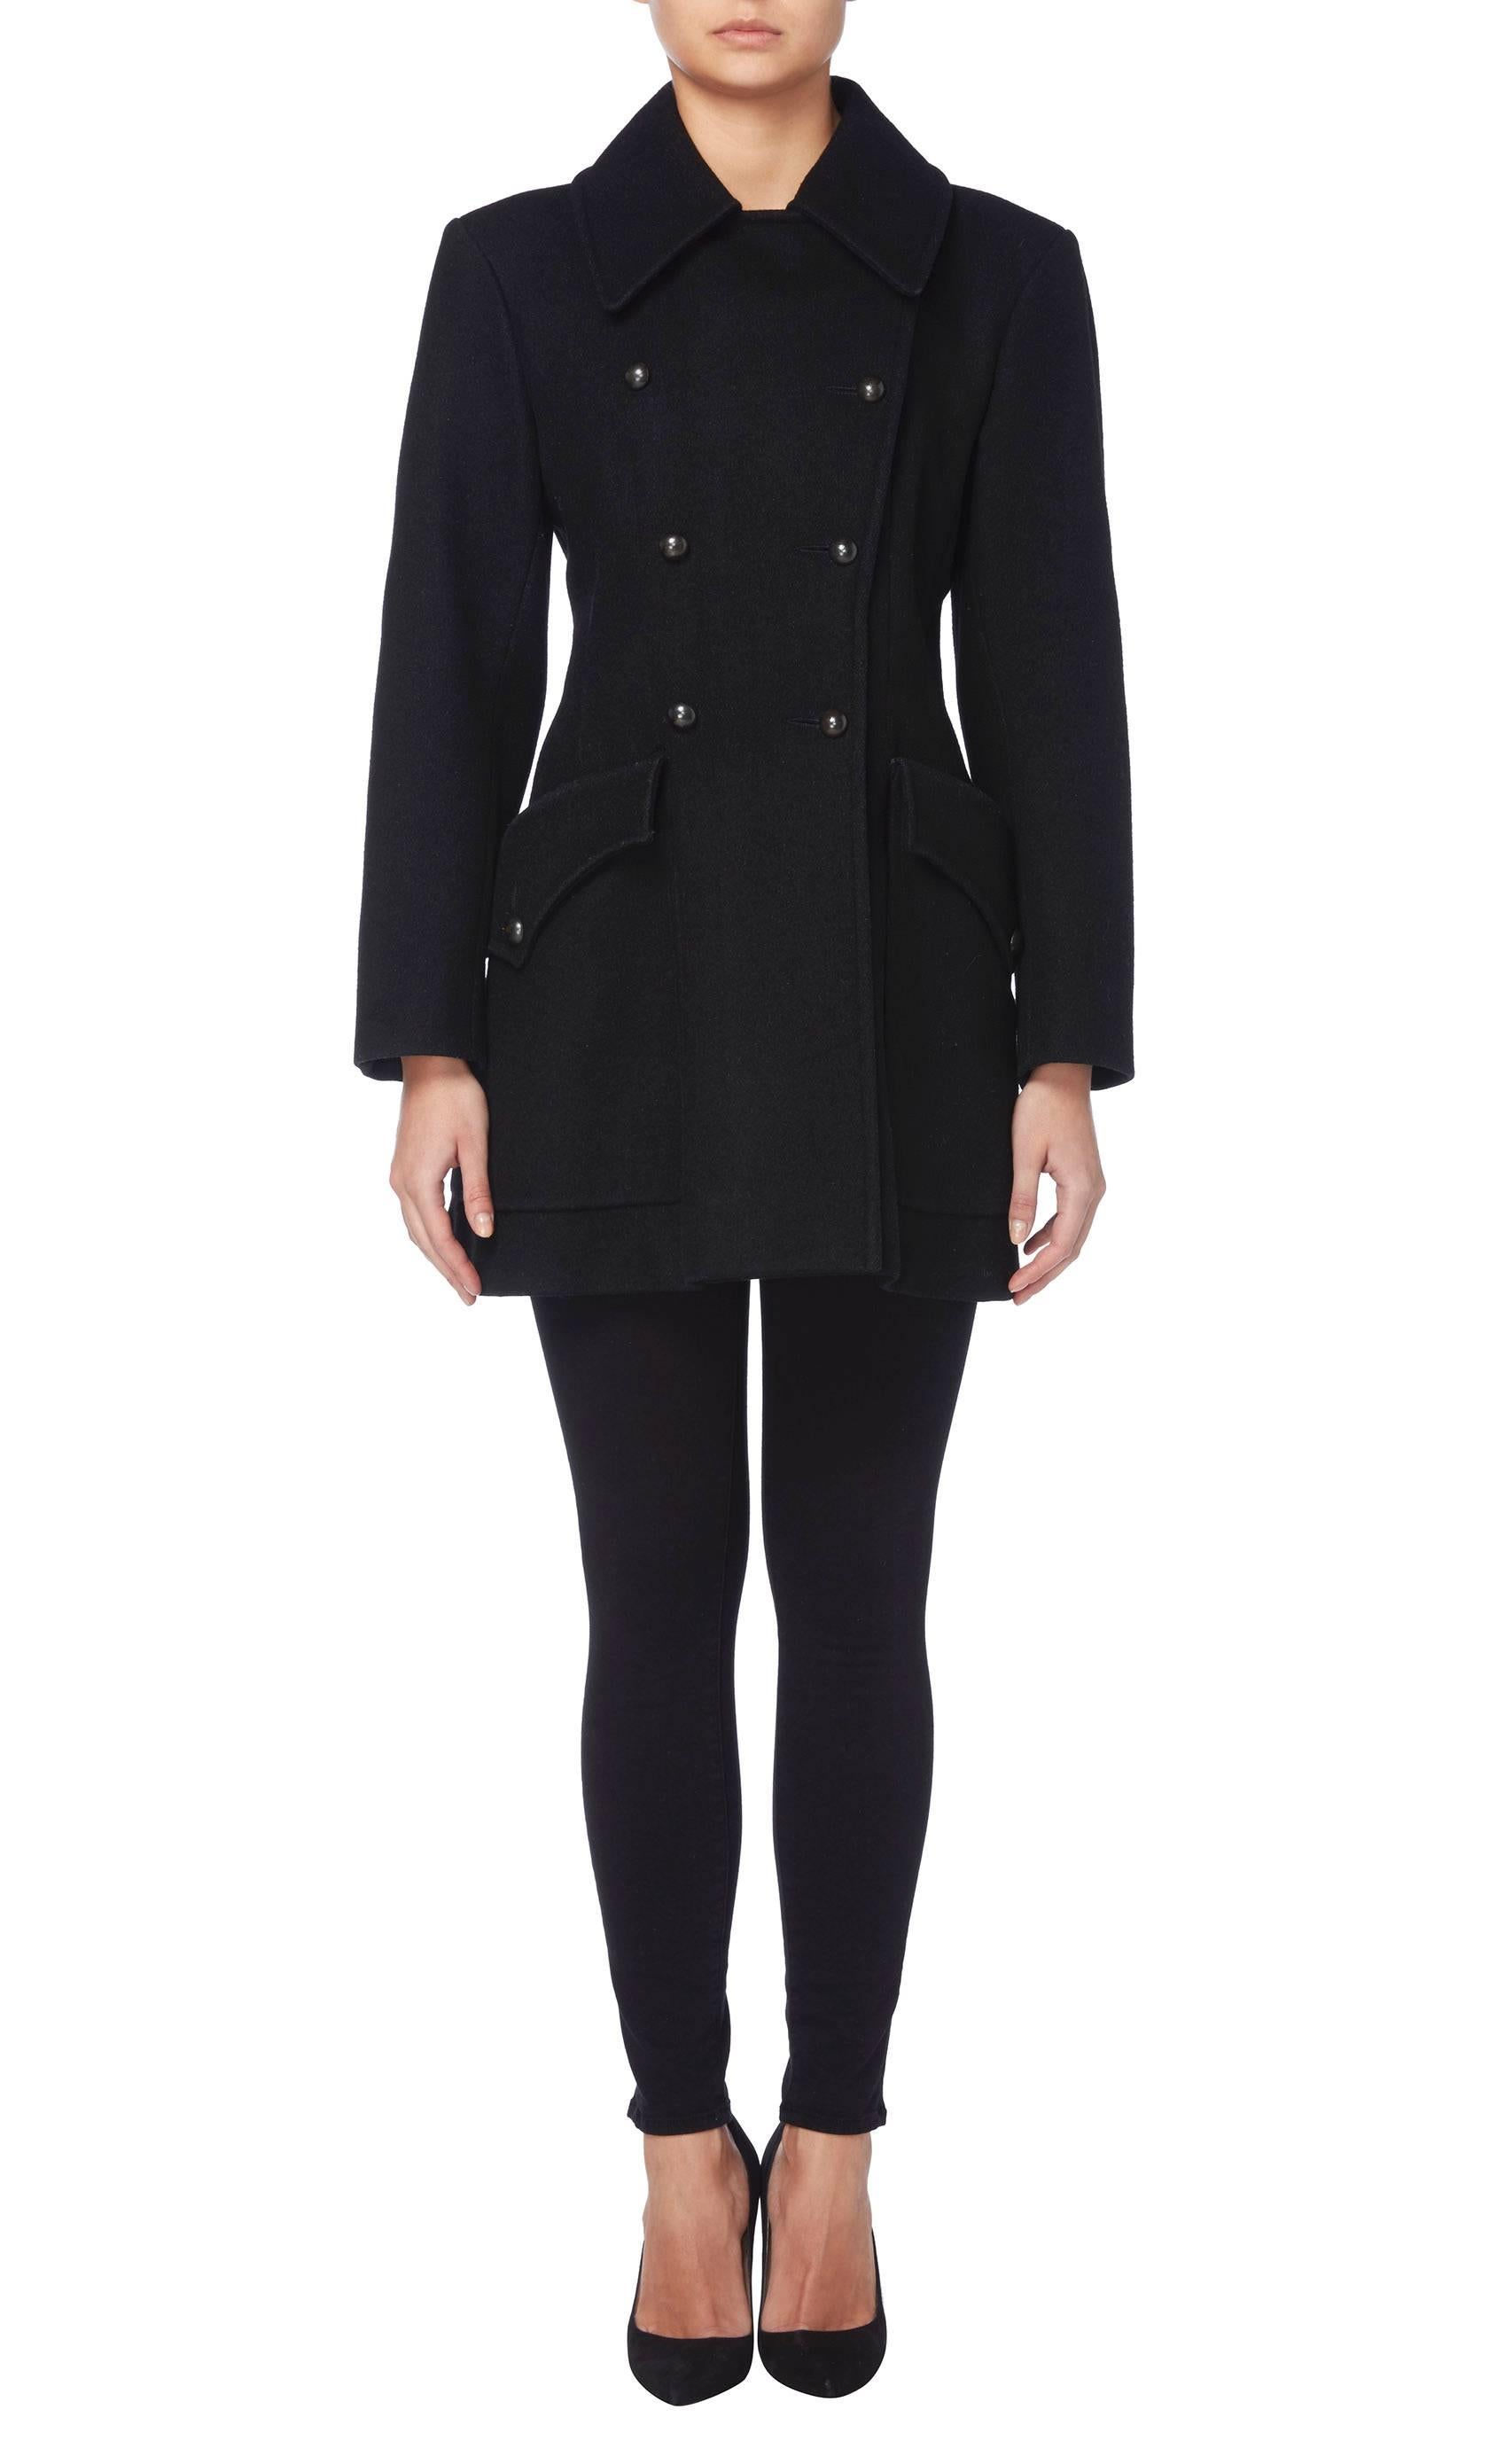 This classic Yves Saint Laurent peacoat is truly timeless and will quickly become a wardrobe staple. Constructed in black wool, the double-breasted coat features a double lapel collar and overscale pockets on the hip. Black buttons fasten to the